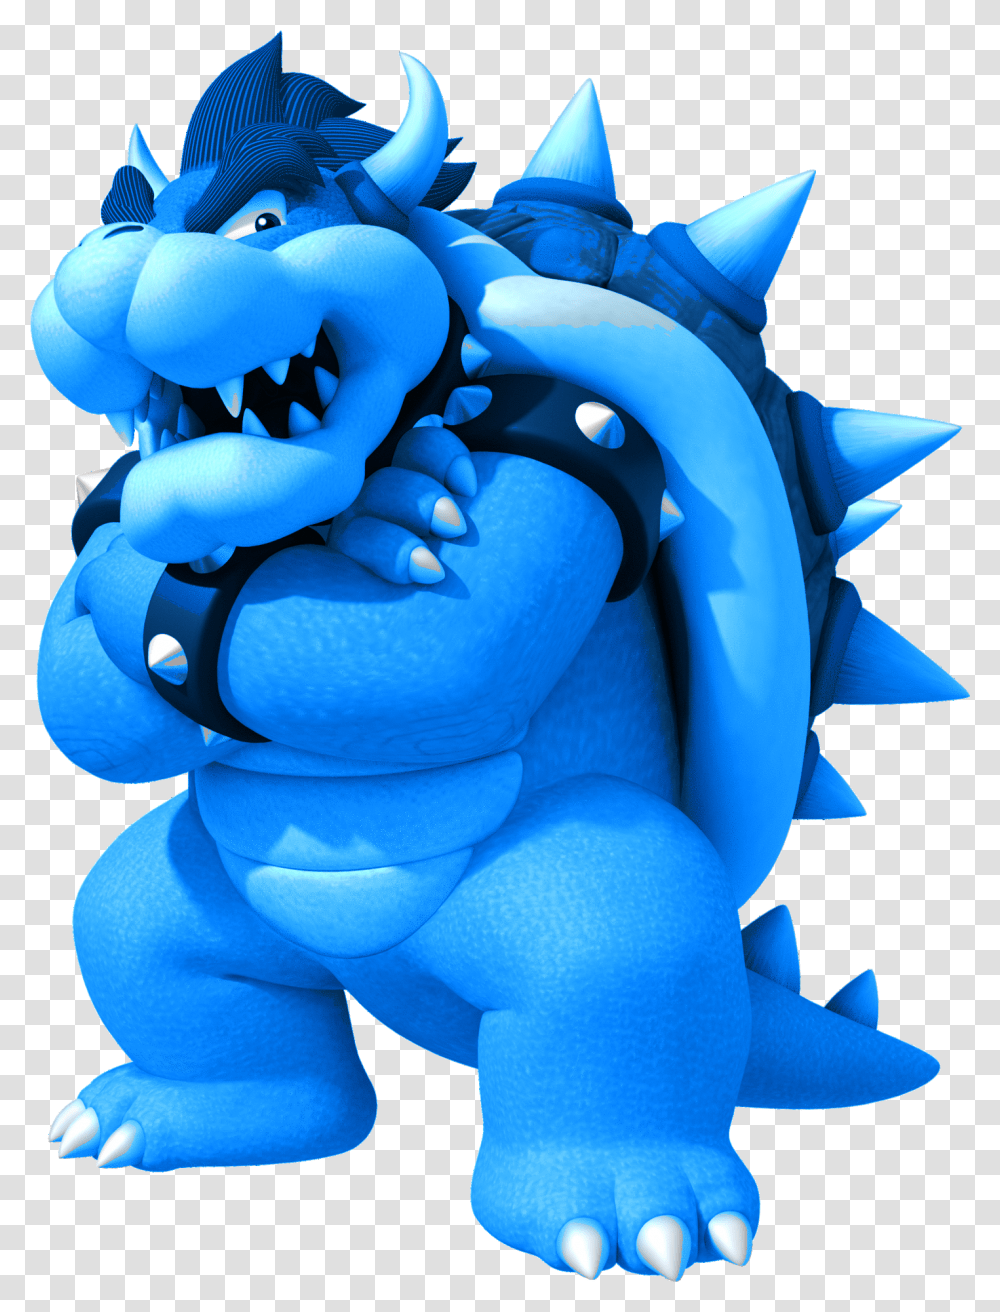 King Koopa From Mario Download Bowser From Mario, Toy, Inflatable, Figurine Transparent Png